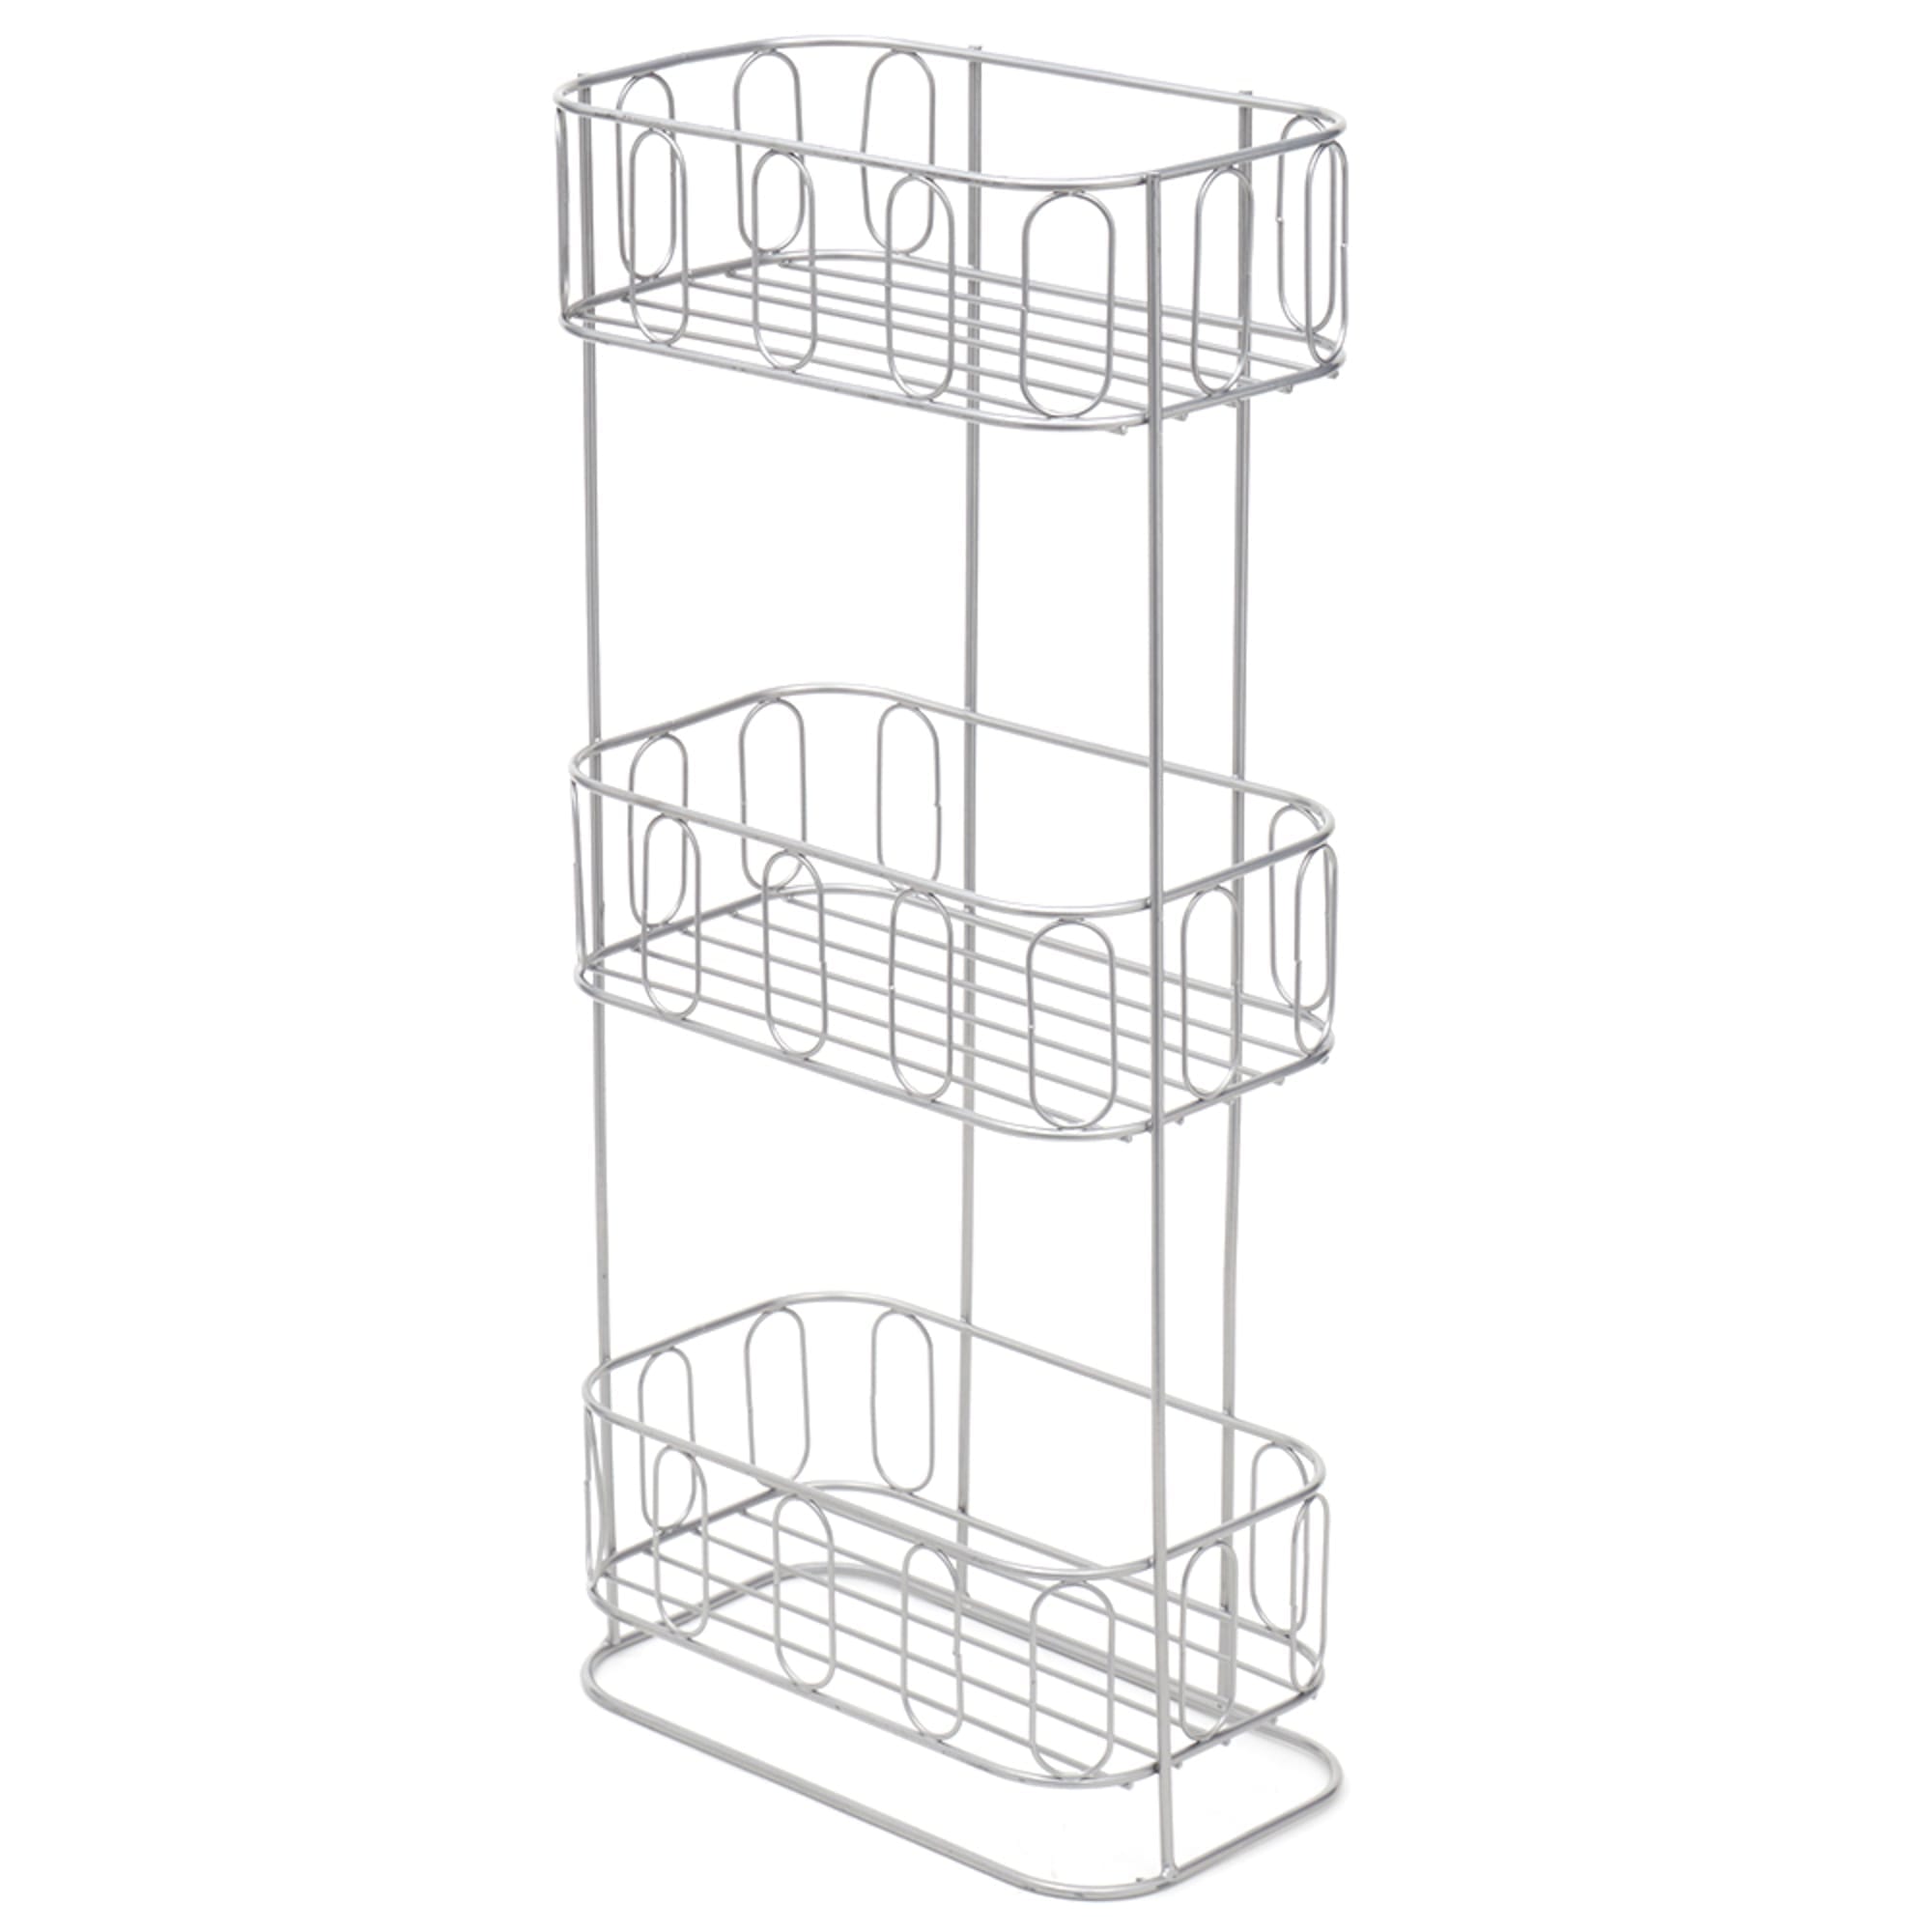 Home Basics Unity 3 Tier Spa Tower, Silver $15 EACH, CASE PACK OF 4